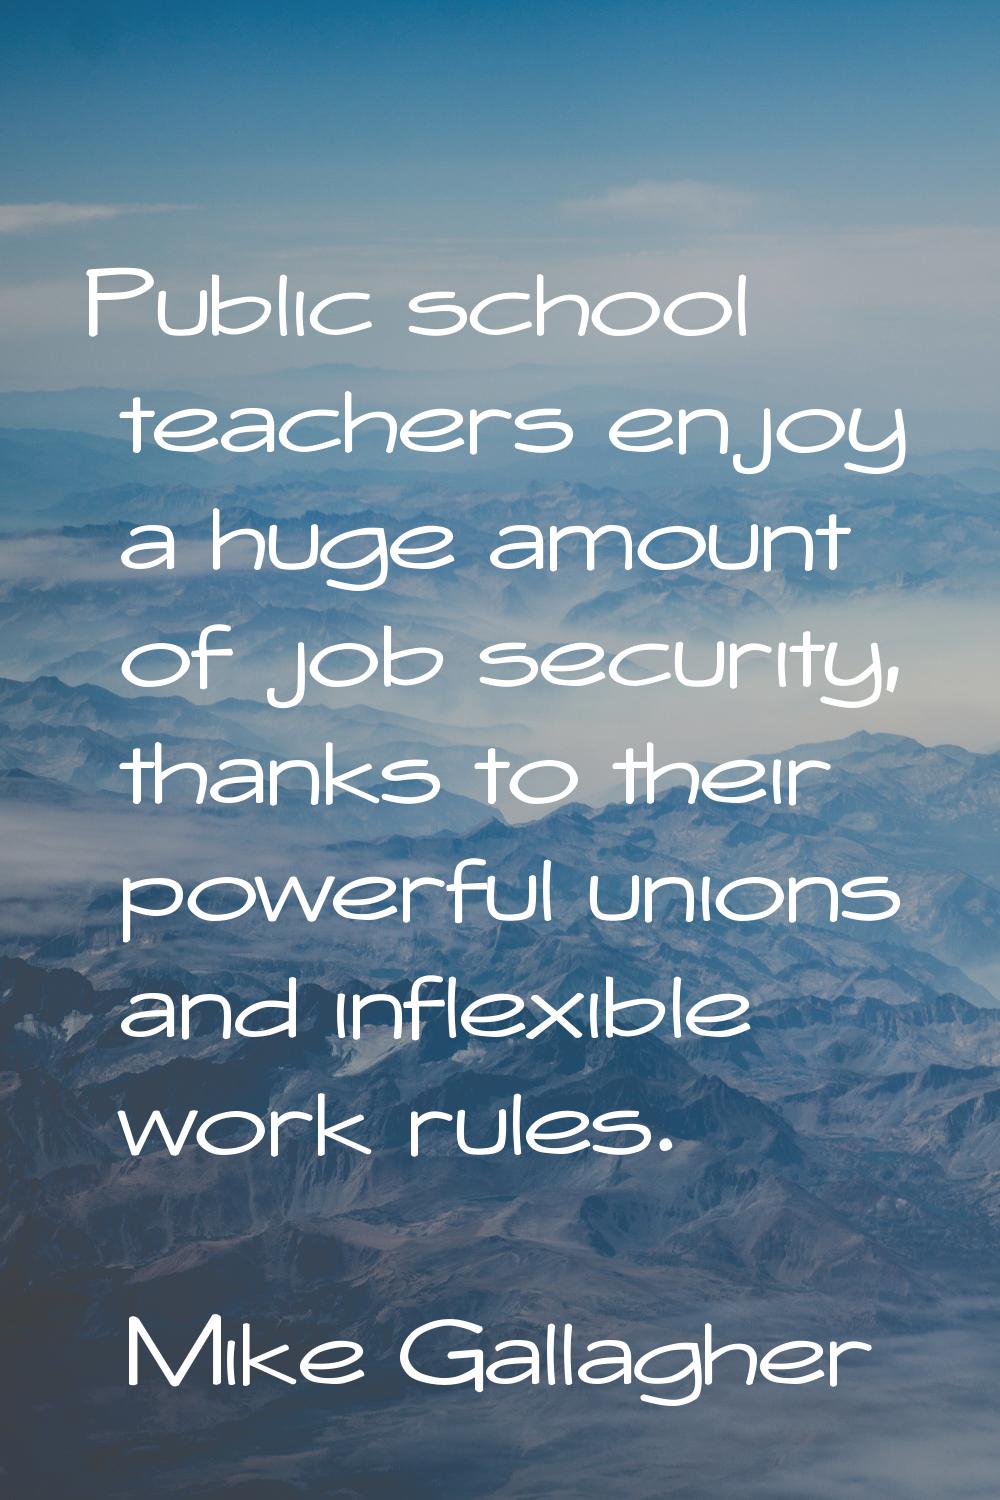 Public school teachers enjoy a huge amount of job security, thanks to their powerful unions and inf